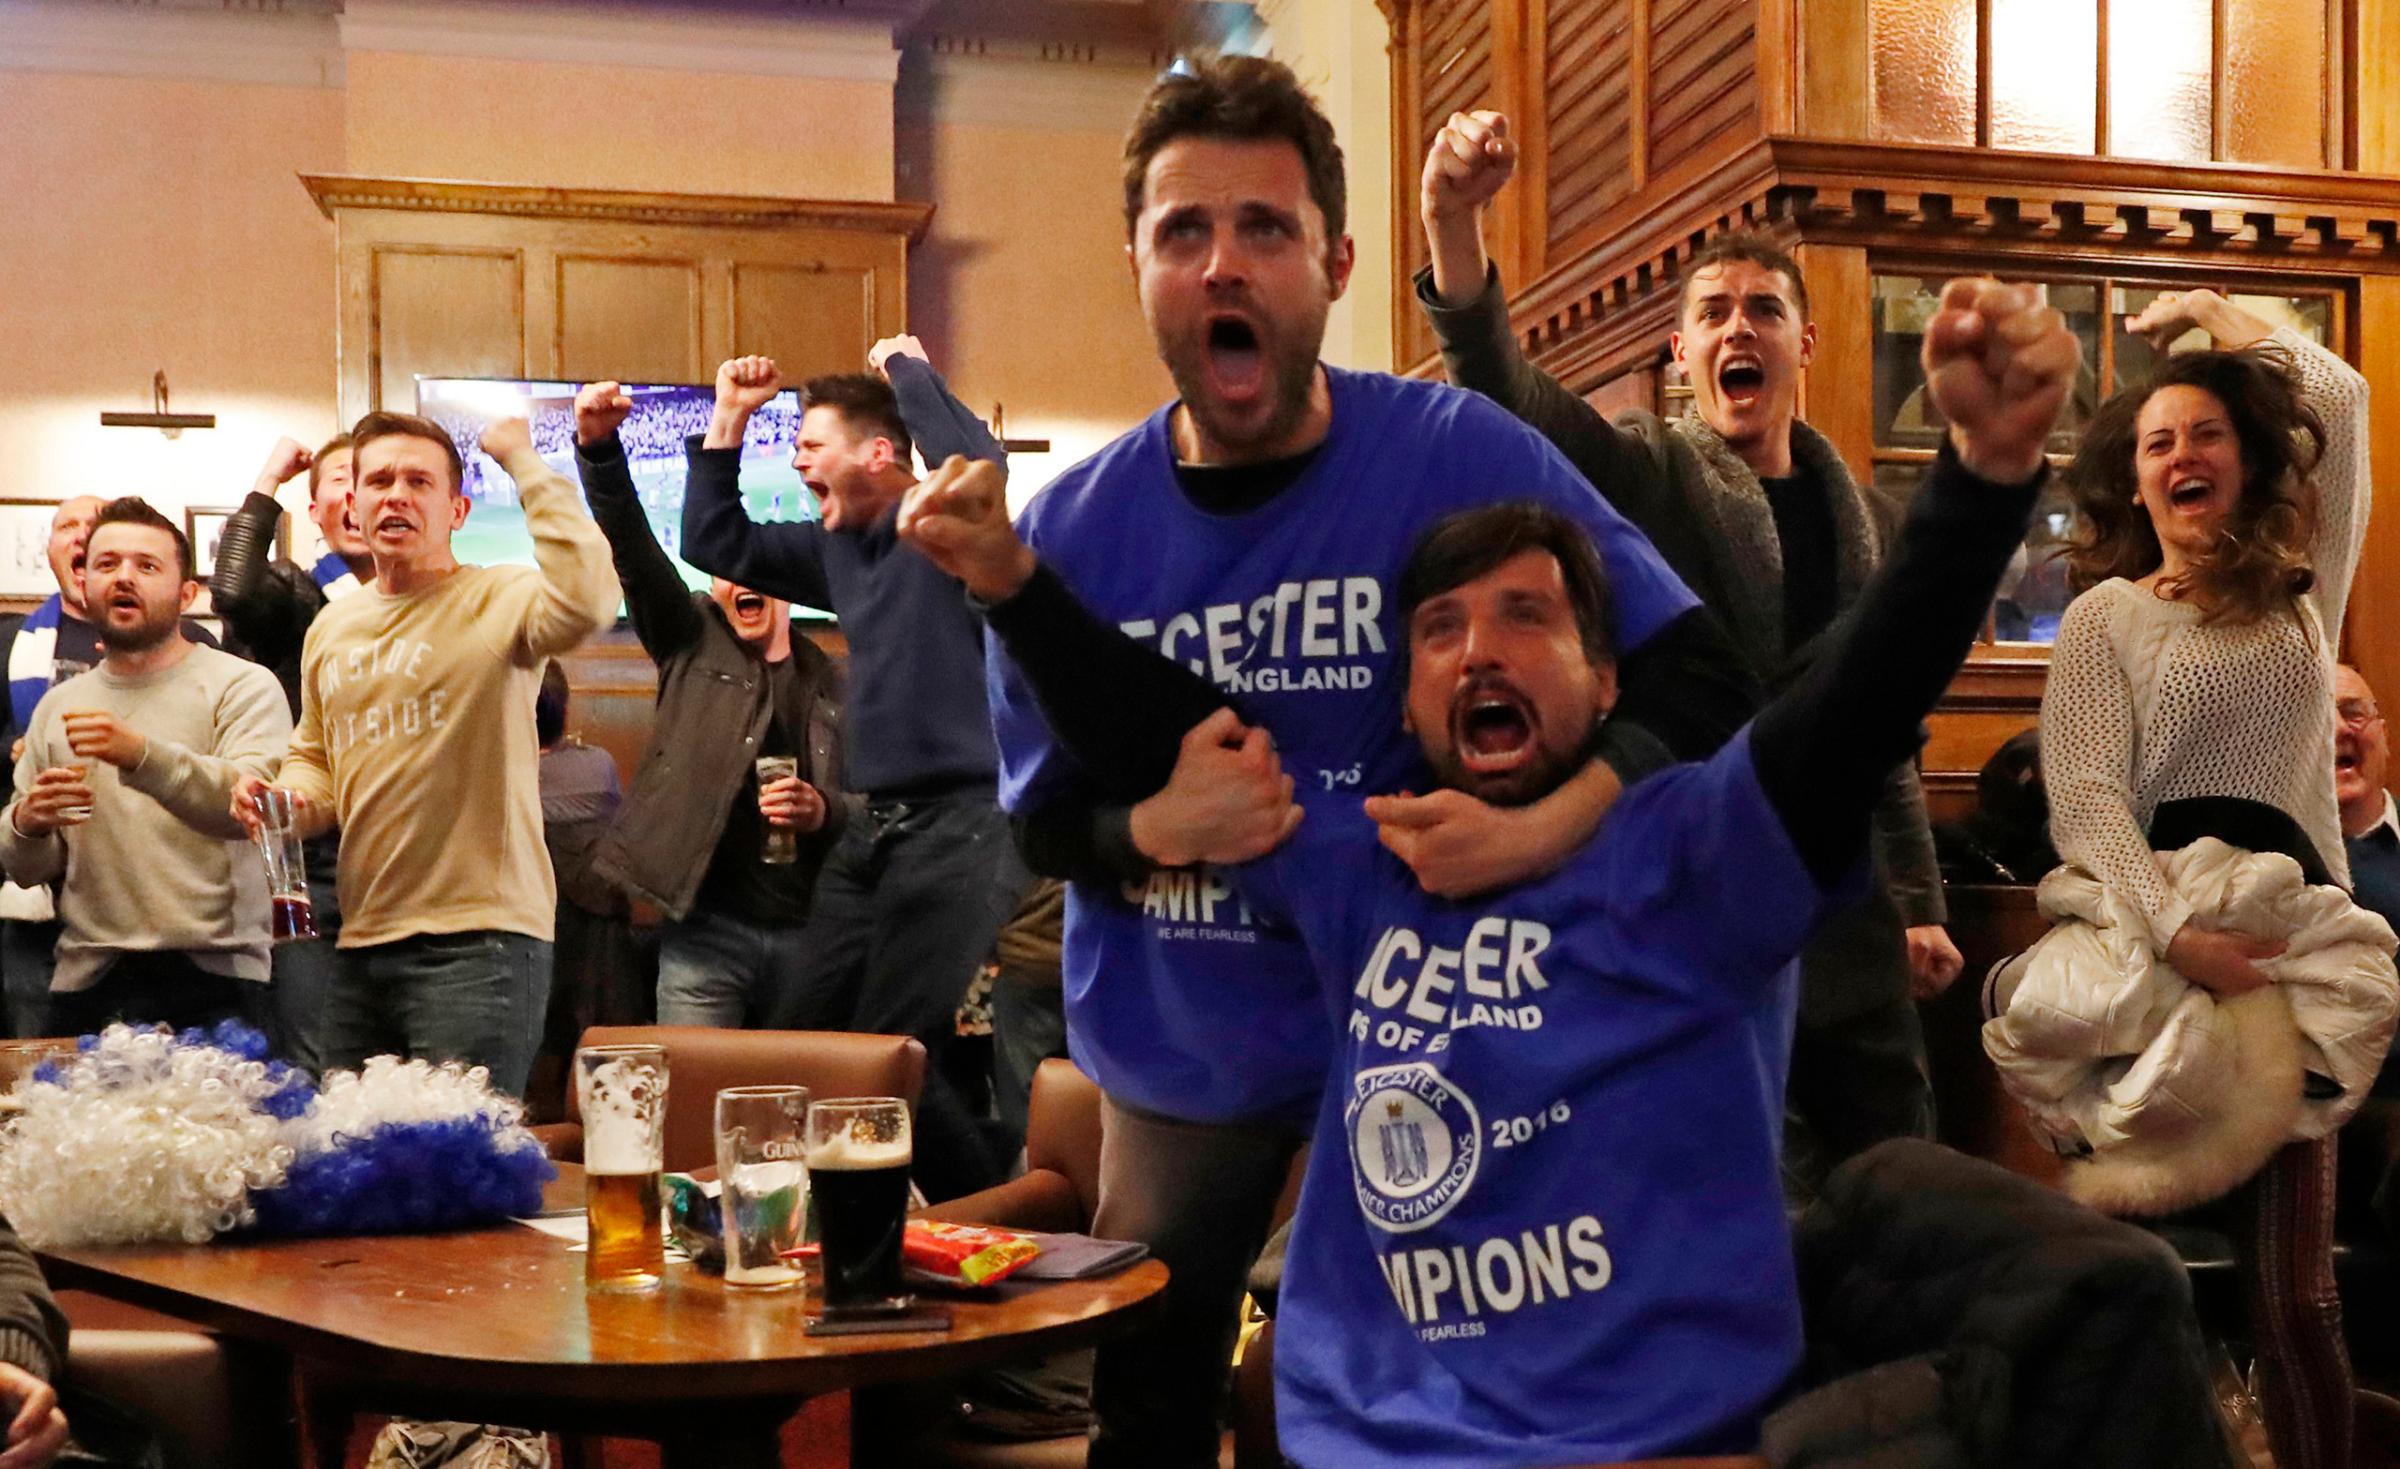 Leicester City fans celebrate after Chelsea's first goal against Tottenham Hotspur at a pub in Leicester, eastern England, May 2, 2016.